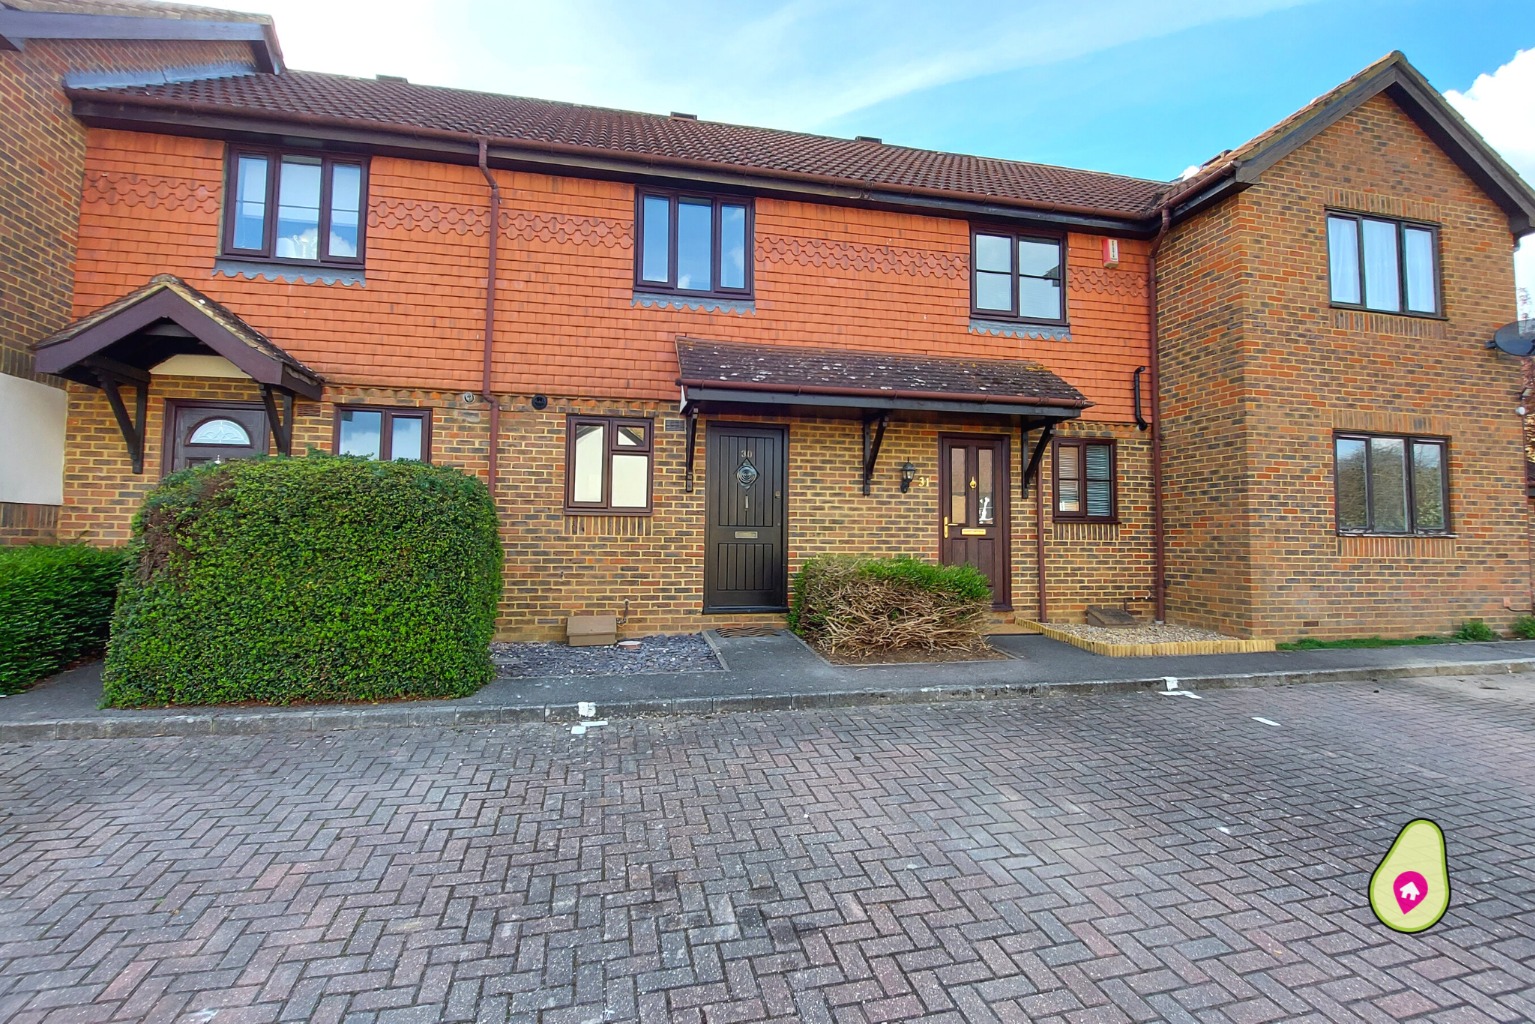 2 bed terraced house for sale in Coleridge Close, Reading - Property Image 1